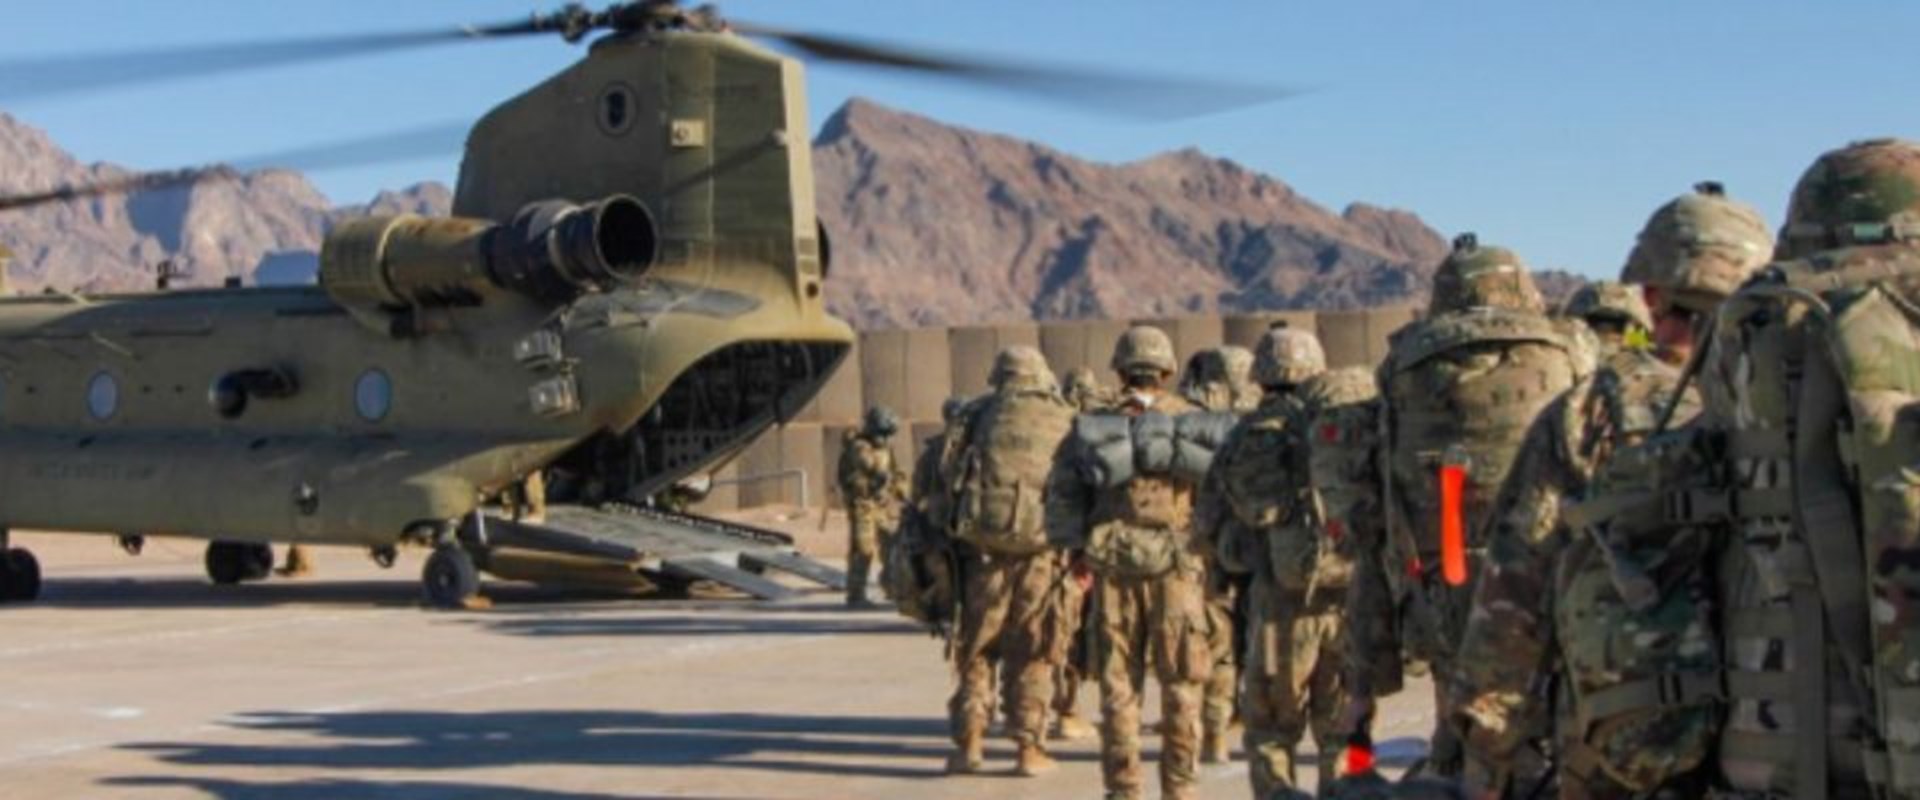 US Military Withdrawal Affect On Contractors In Afghanistan